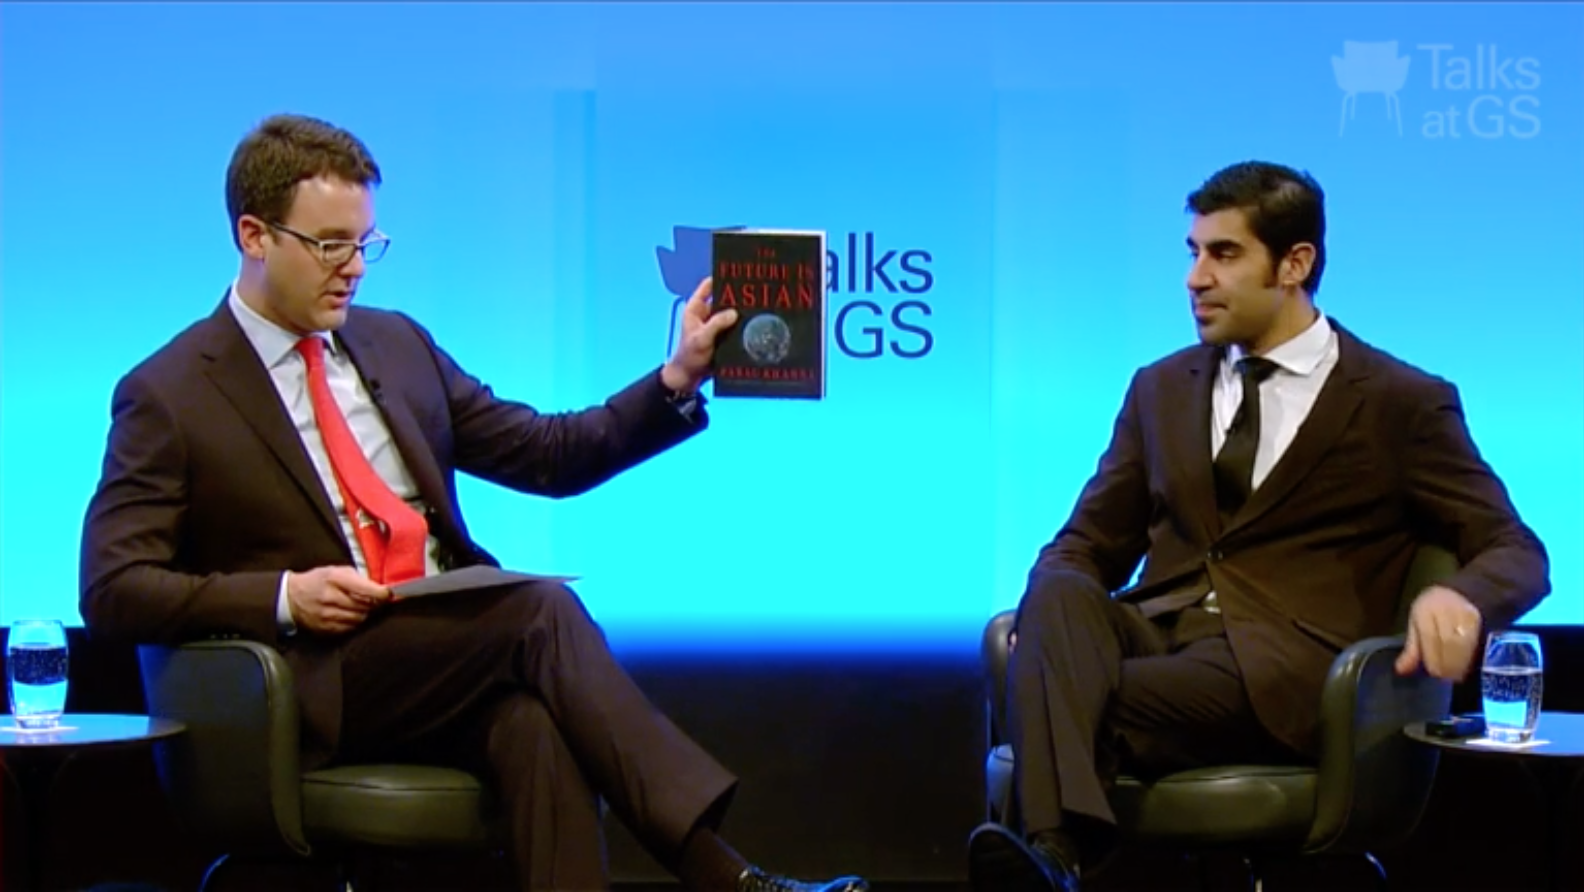 Talks @ GS: The Next Wave of Asian Growth